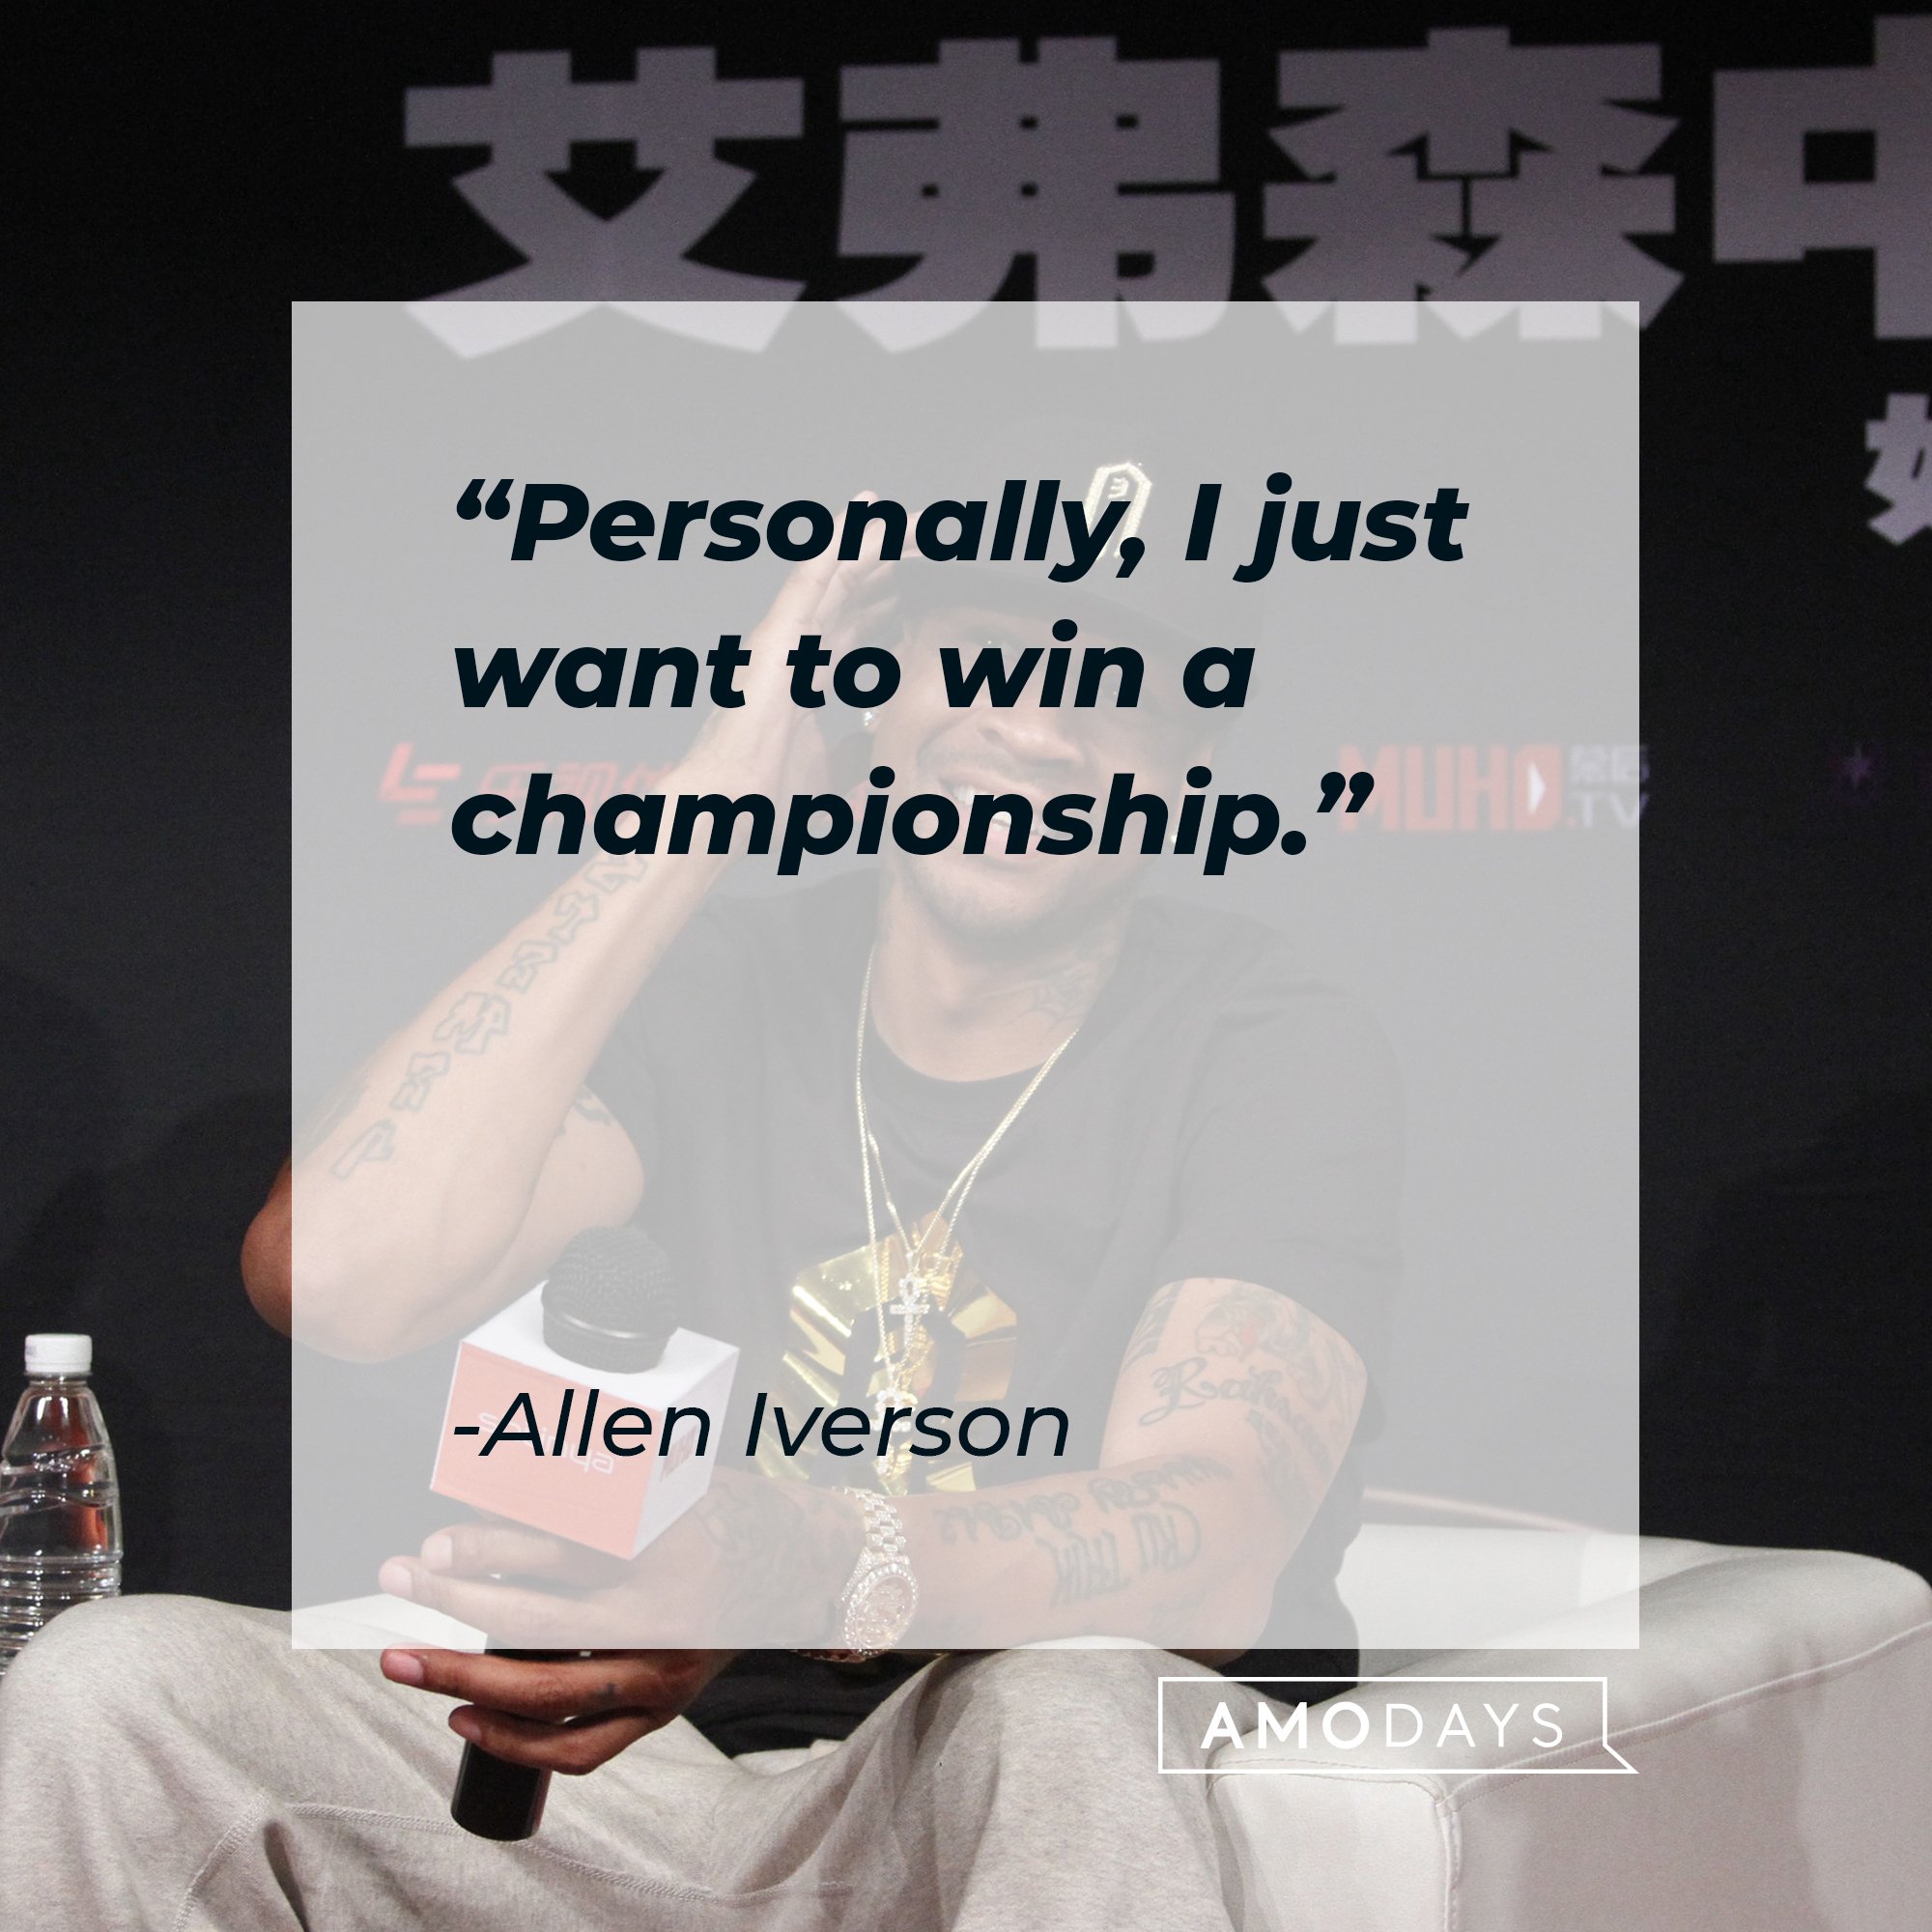 Allen Iverson's quote: "Personally, I just want to win a championship." | Image: AmoDays